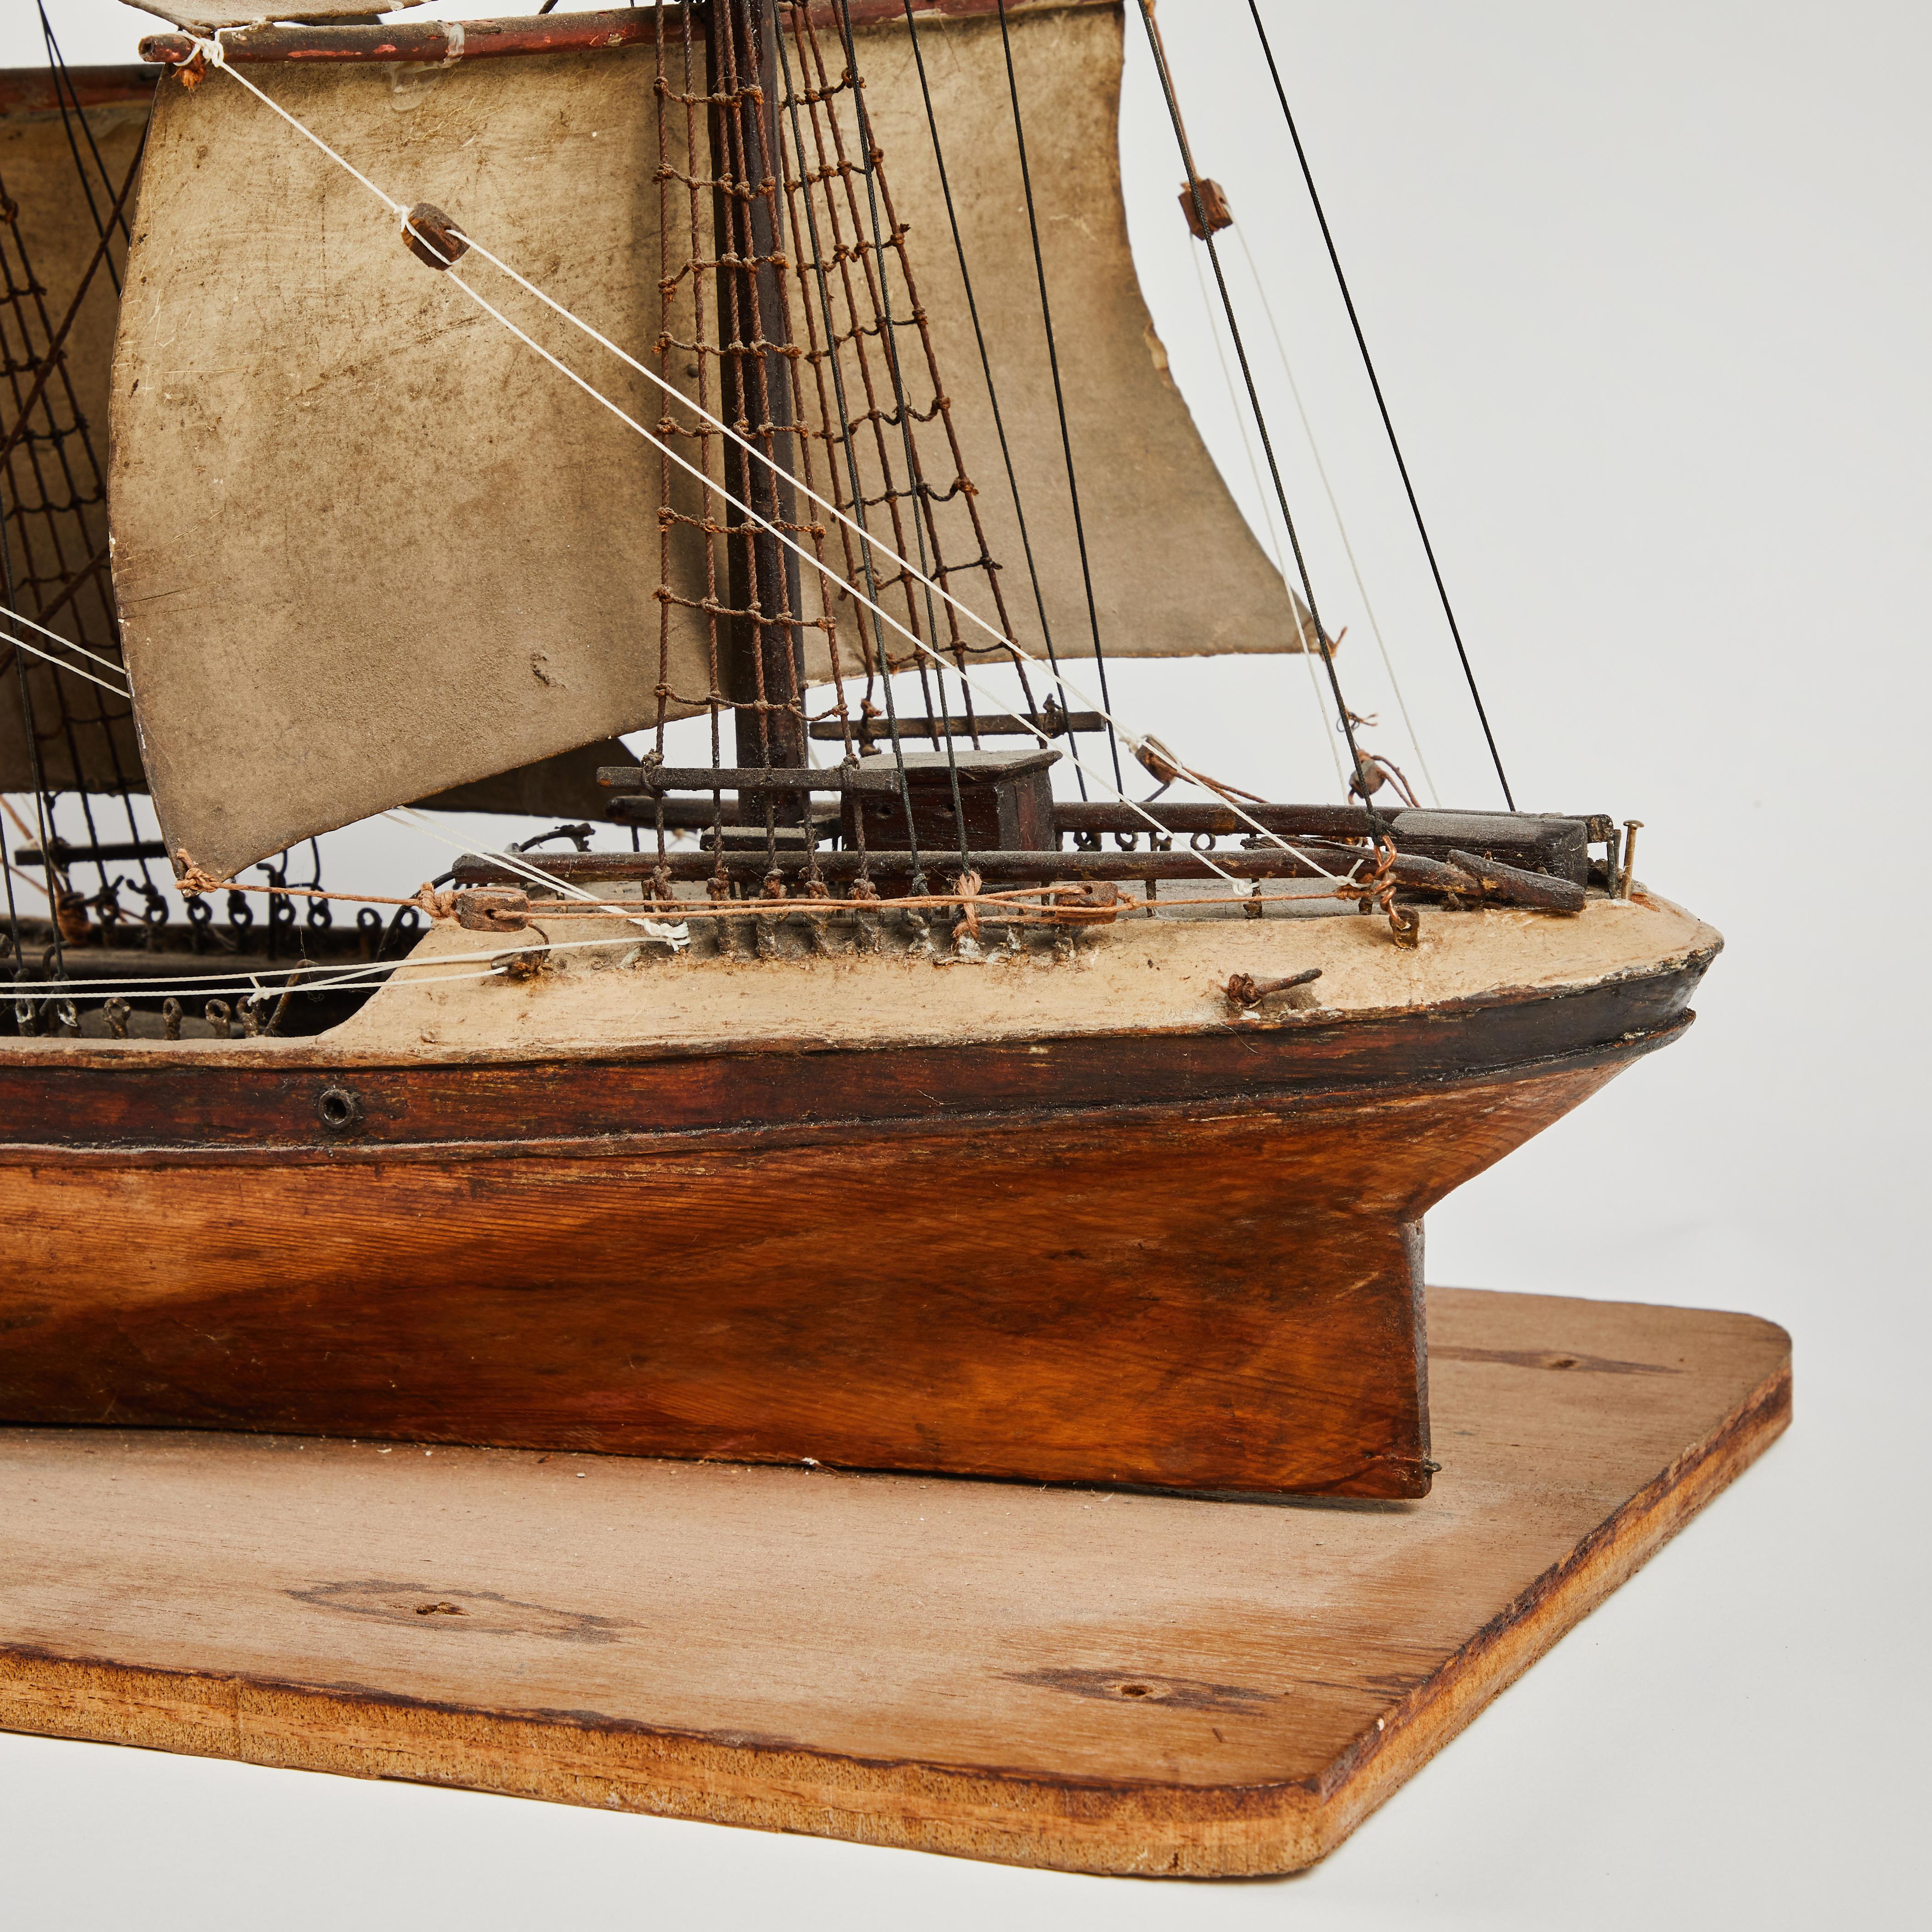 Late 19th century handmade wooden ship model from France. 